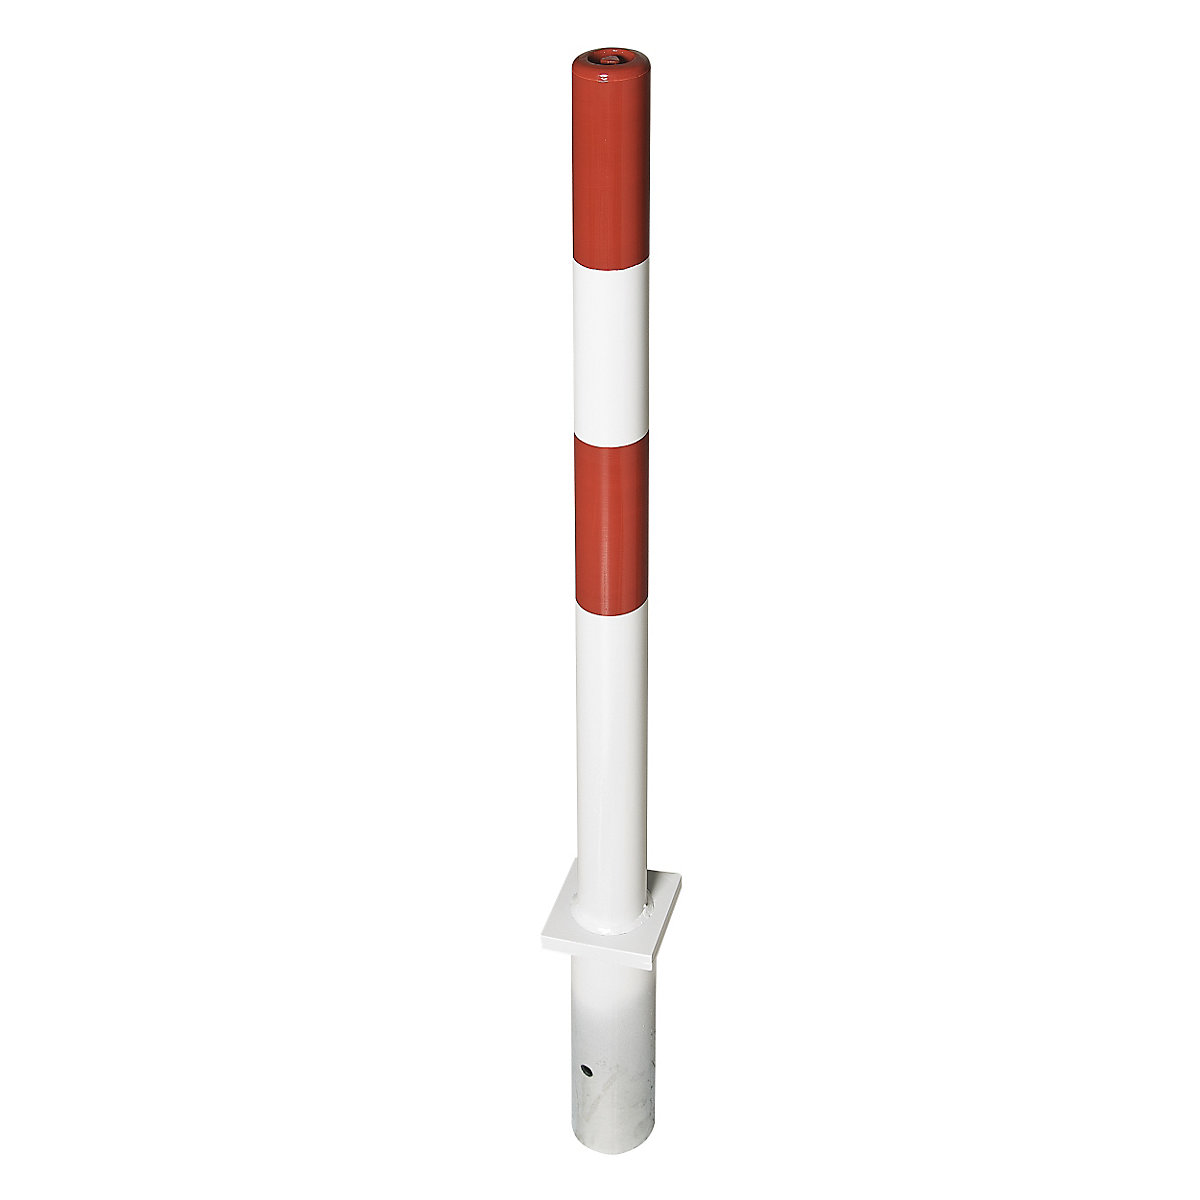 Barrier post made of steel, for setting in concrete, Ø 60 mm, red/white, 1 chain eyelet-9